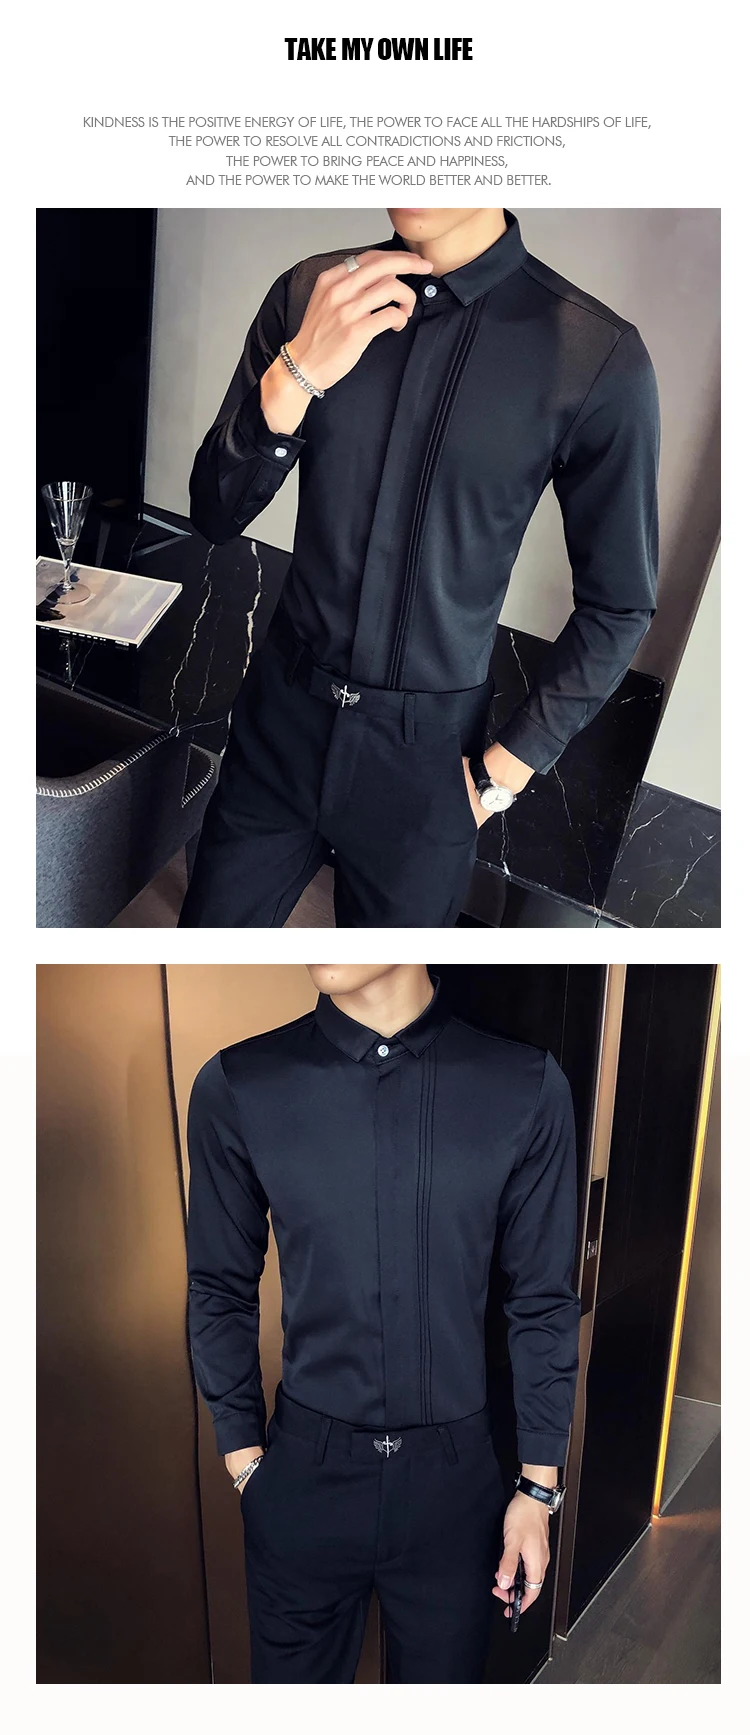 British Style Spring New 2022 Men Tuxedo Shirt Long Sleeve Fashion Simple Front Folds Design Slim Fit Casual Dress Blouse Homme